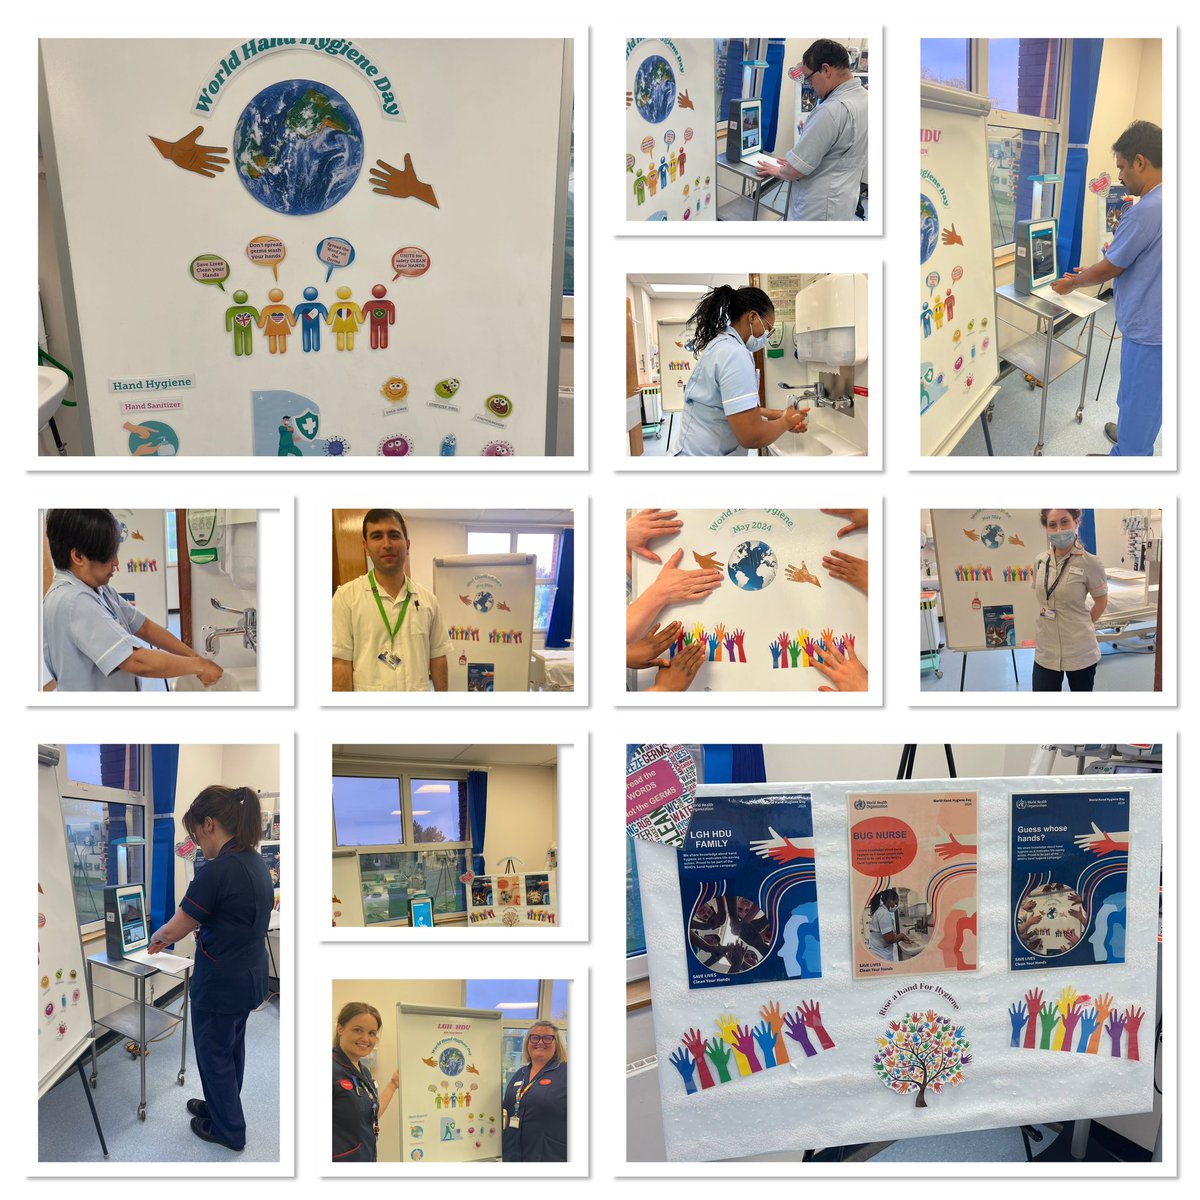 Getting ready for World Hand Hygiene day on HDU! A big shout out and thank you to our brilliant IP link team for putting this together!! So good to see all staff getting involved! @SianieD83 @SharonWICU @JasonHofN @JudeB86 @uhl_IPteam #HandHygiene